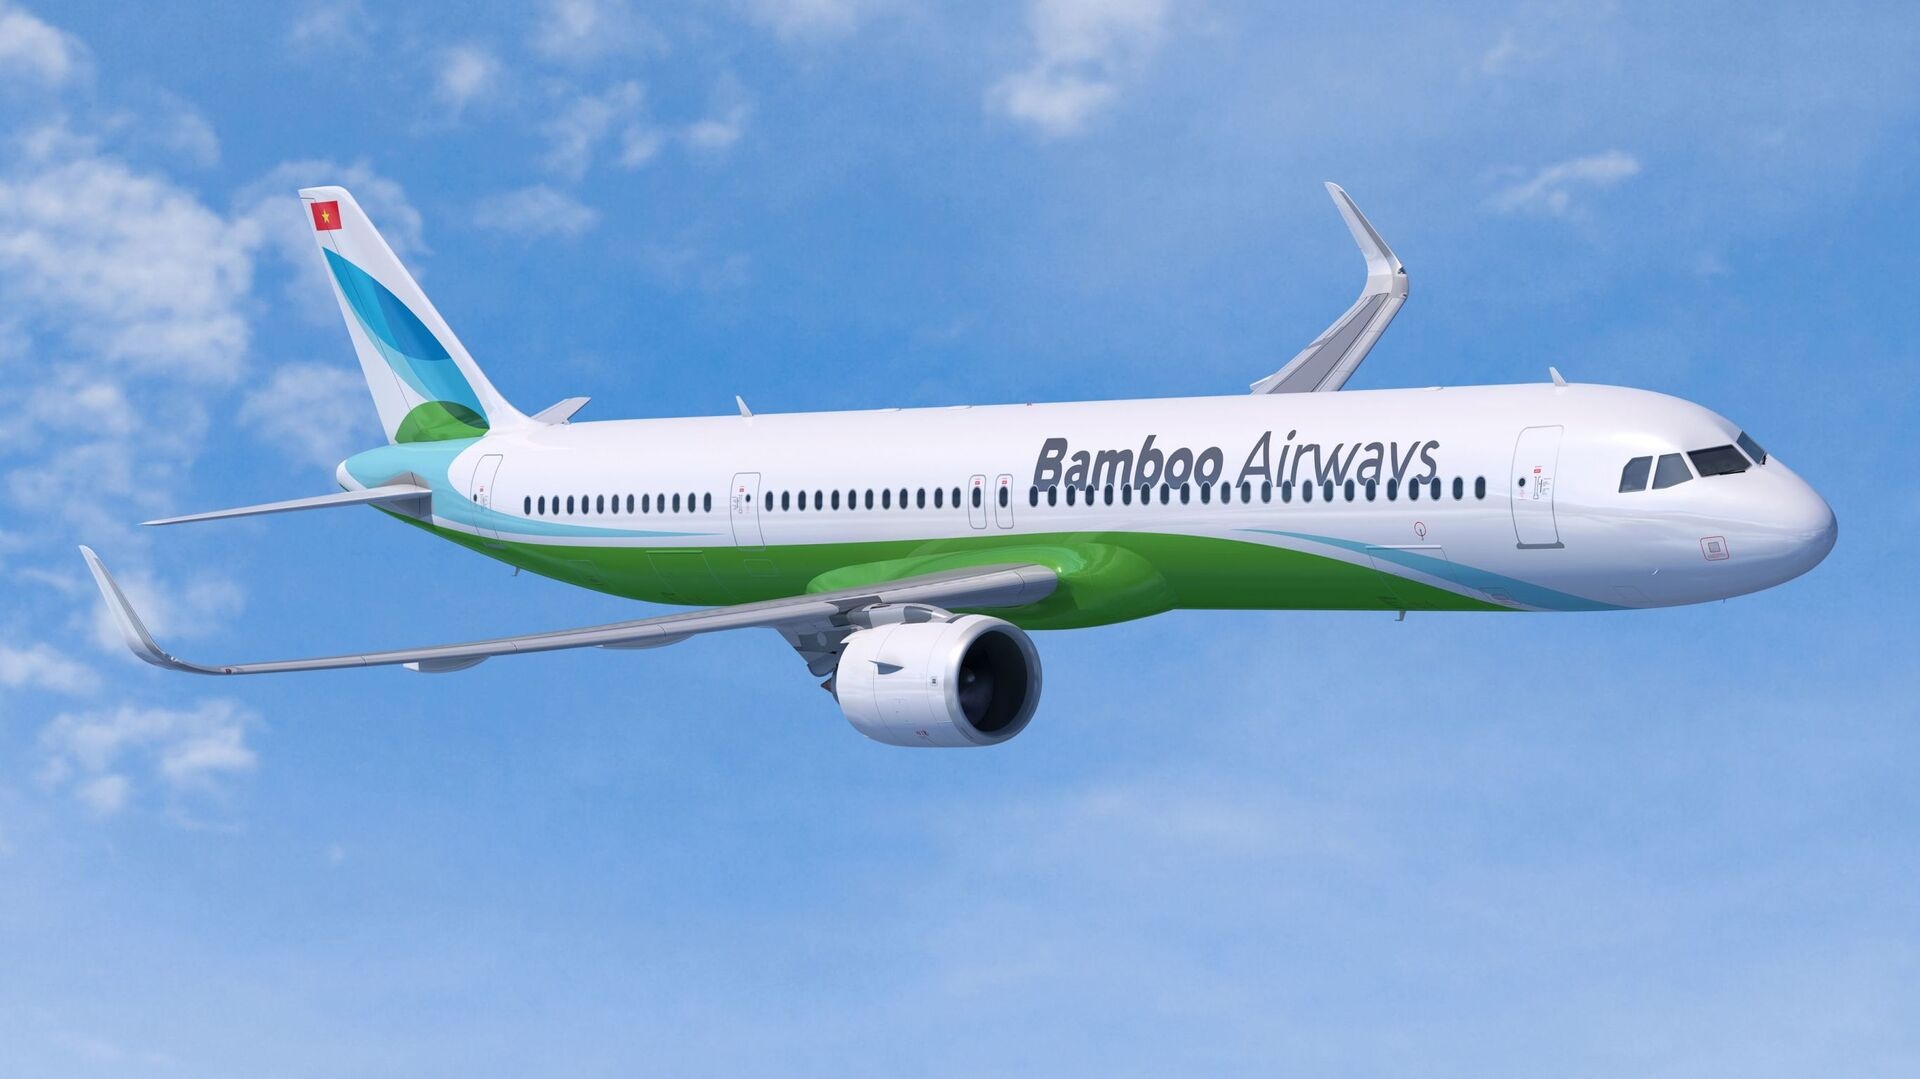 Sacombank eyes investment in Bamboo Airways amidst airline reshuffle